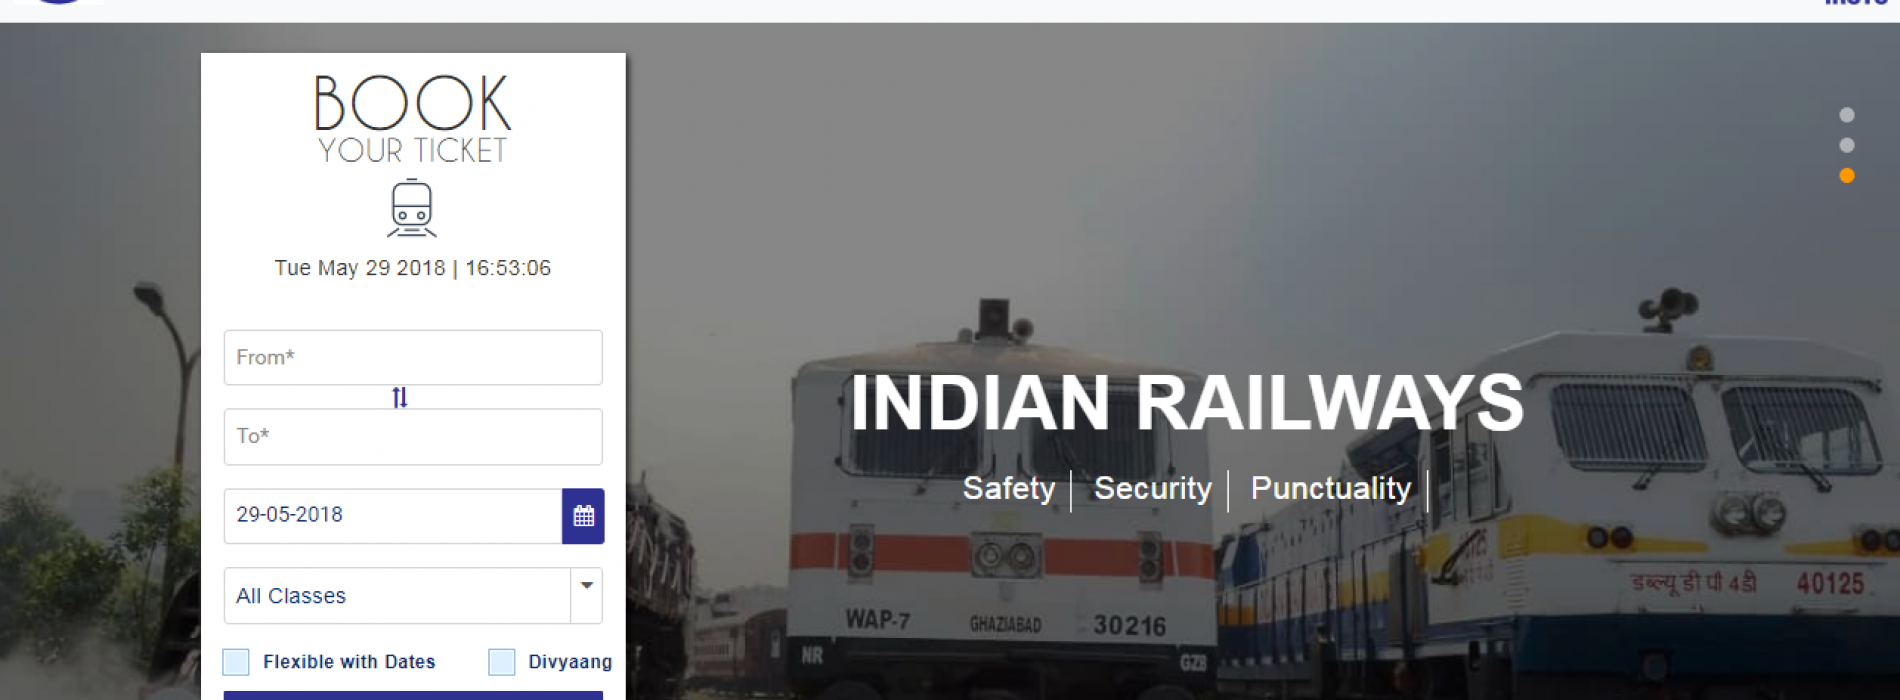 IRCTC.co.in website gets a facelift